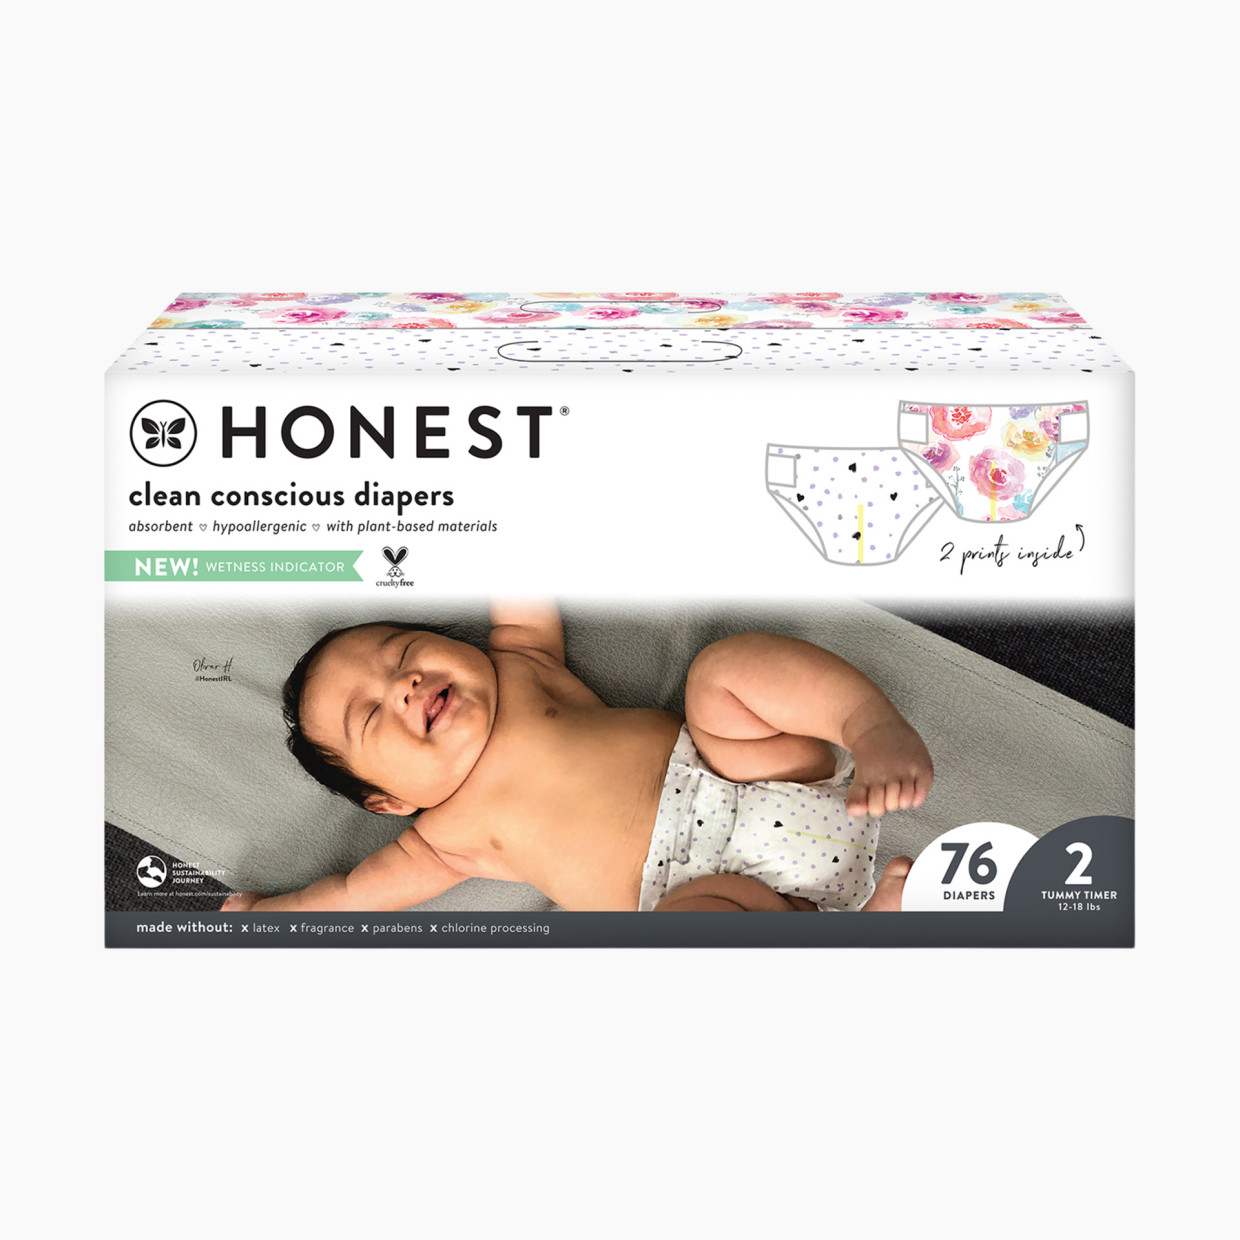 The Honest Company Club Box Diapers - Young At Heart + Rose Blossom, Size 2, 76 Count.